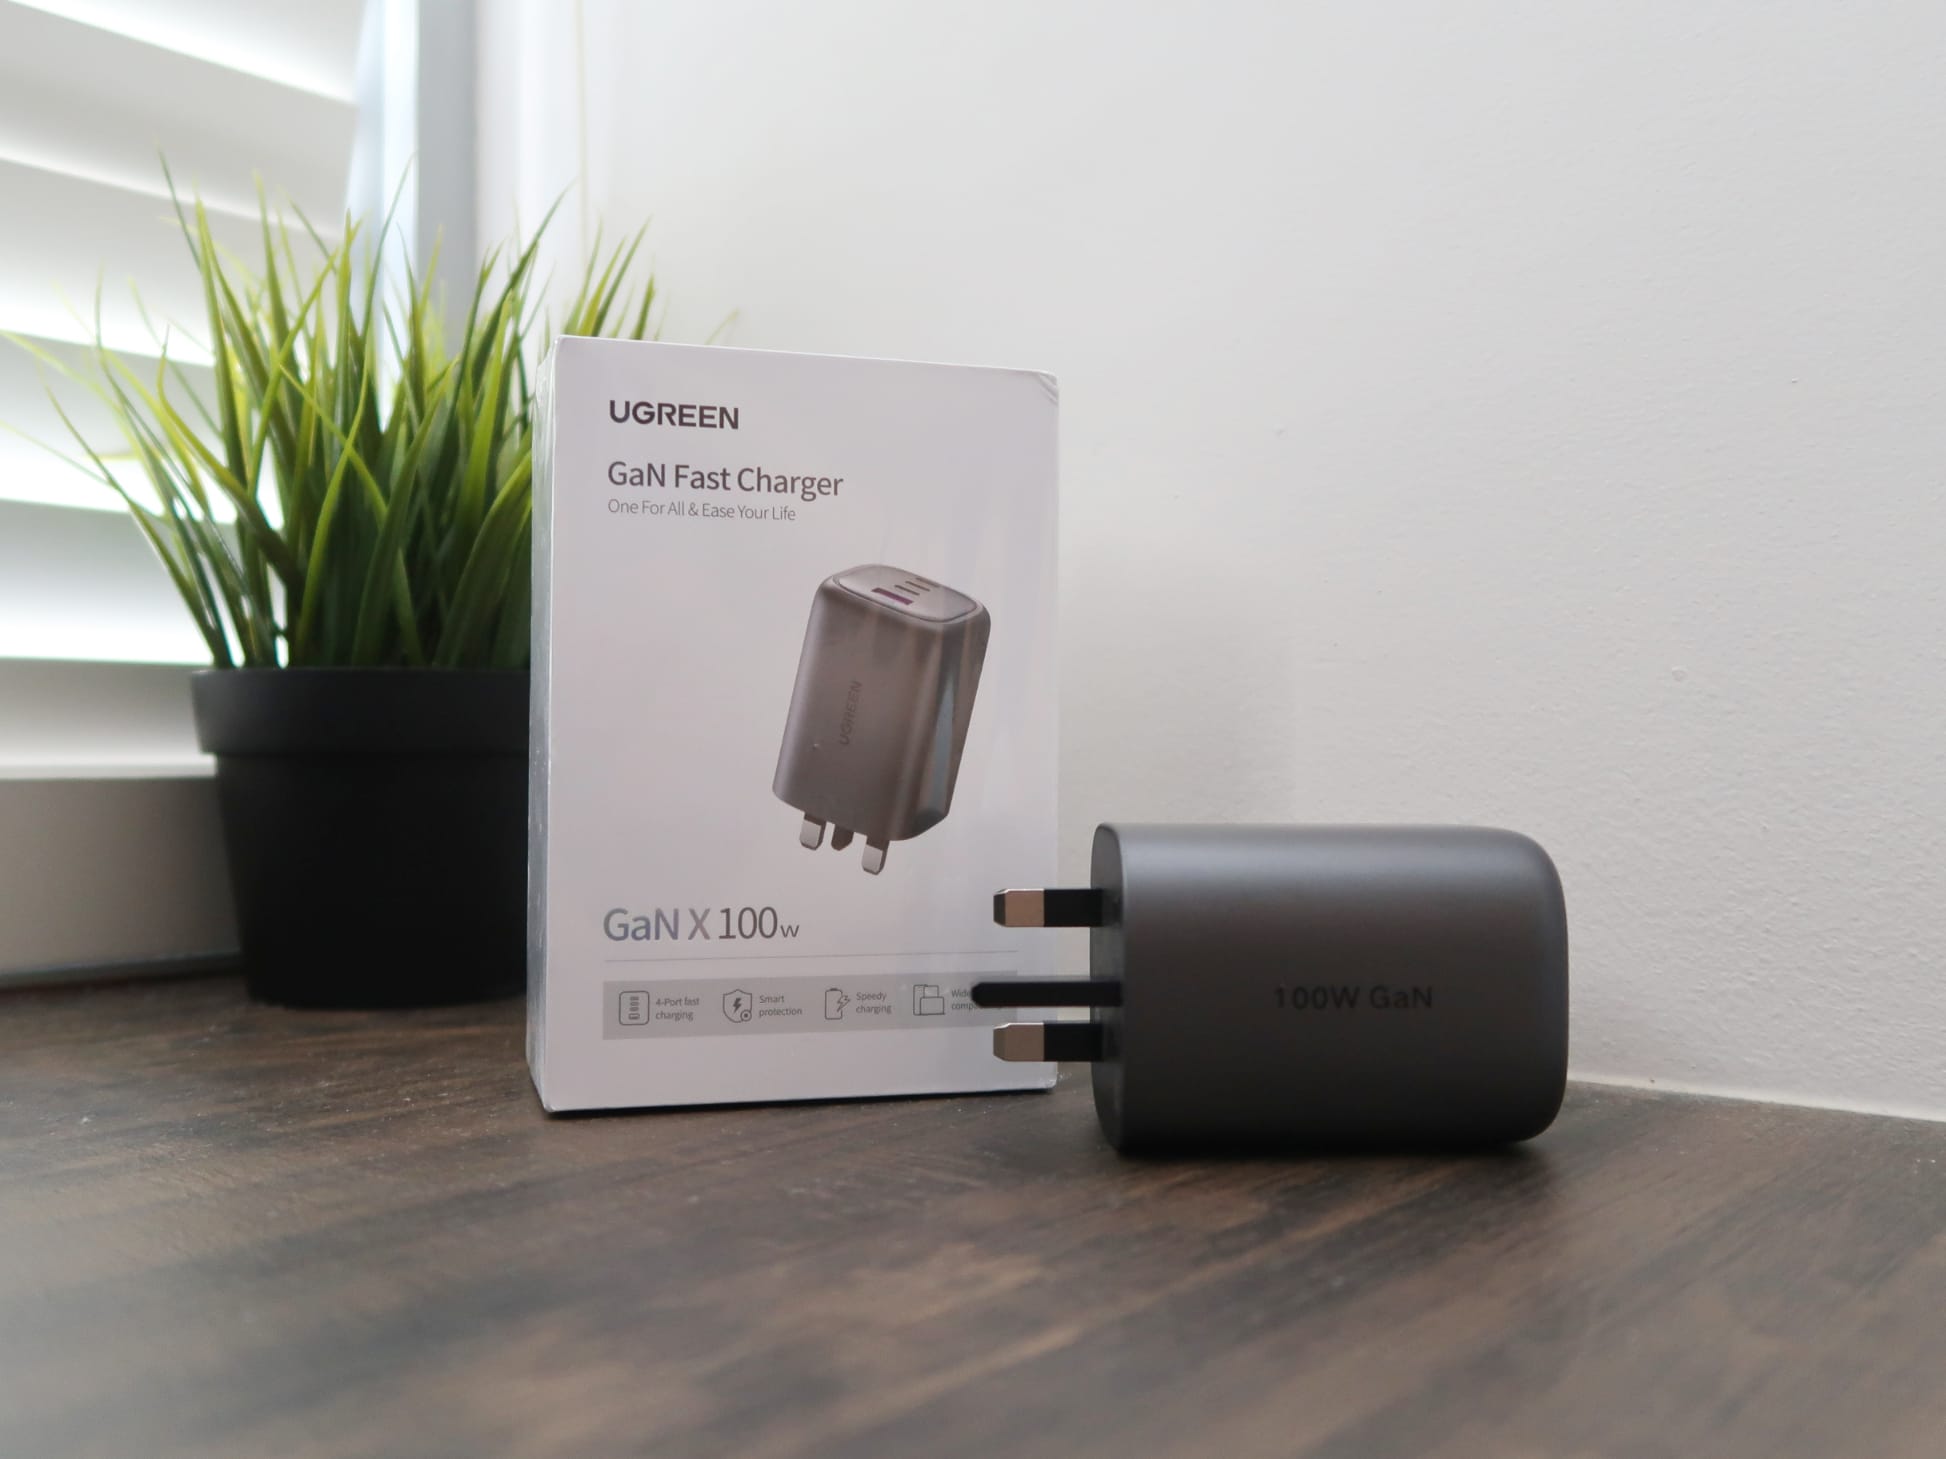 Ugreen 100W GaN charger review: A perfect charging solution